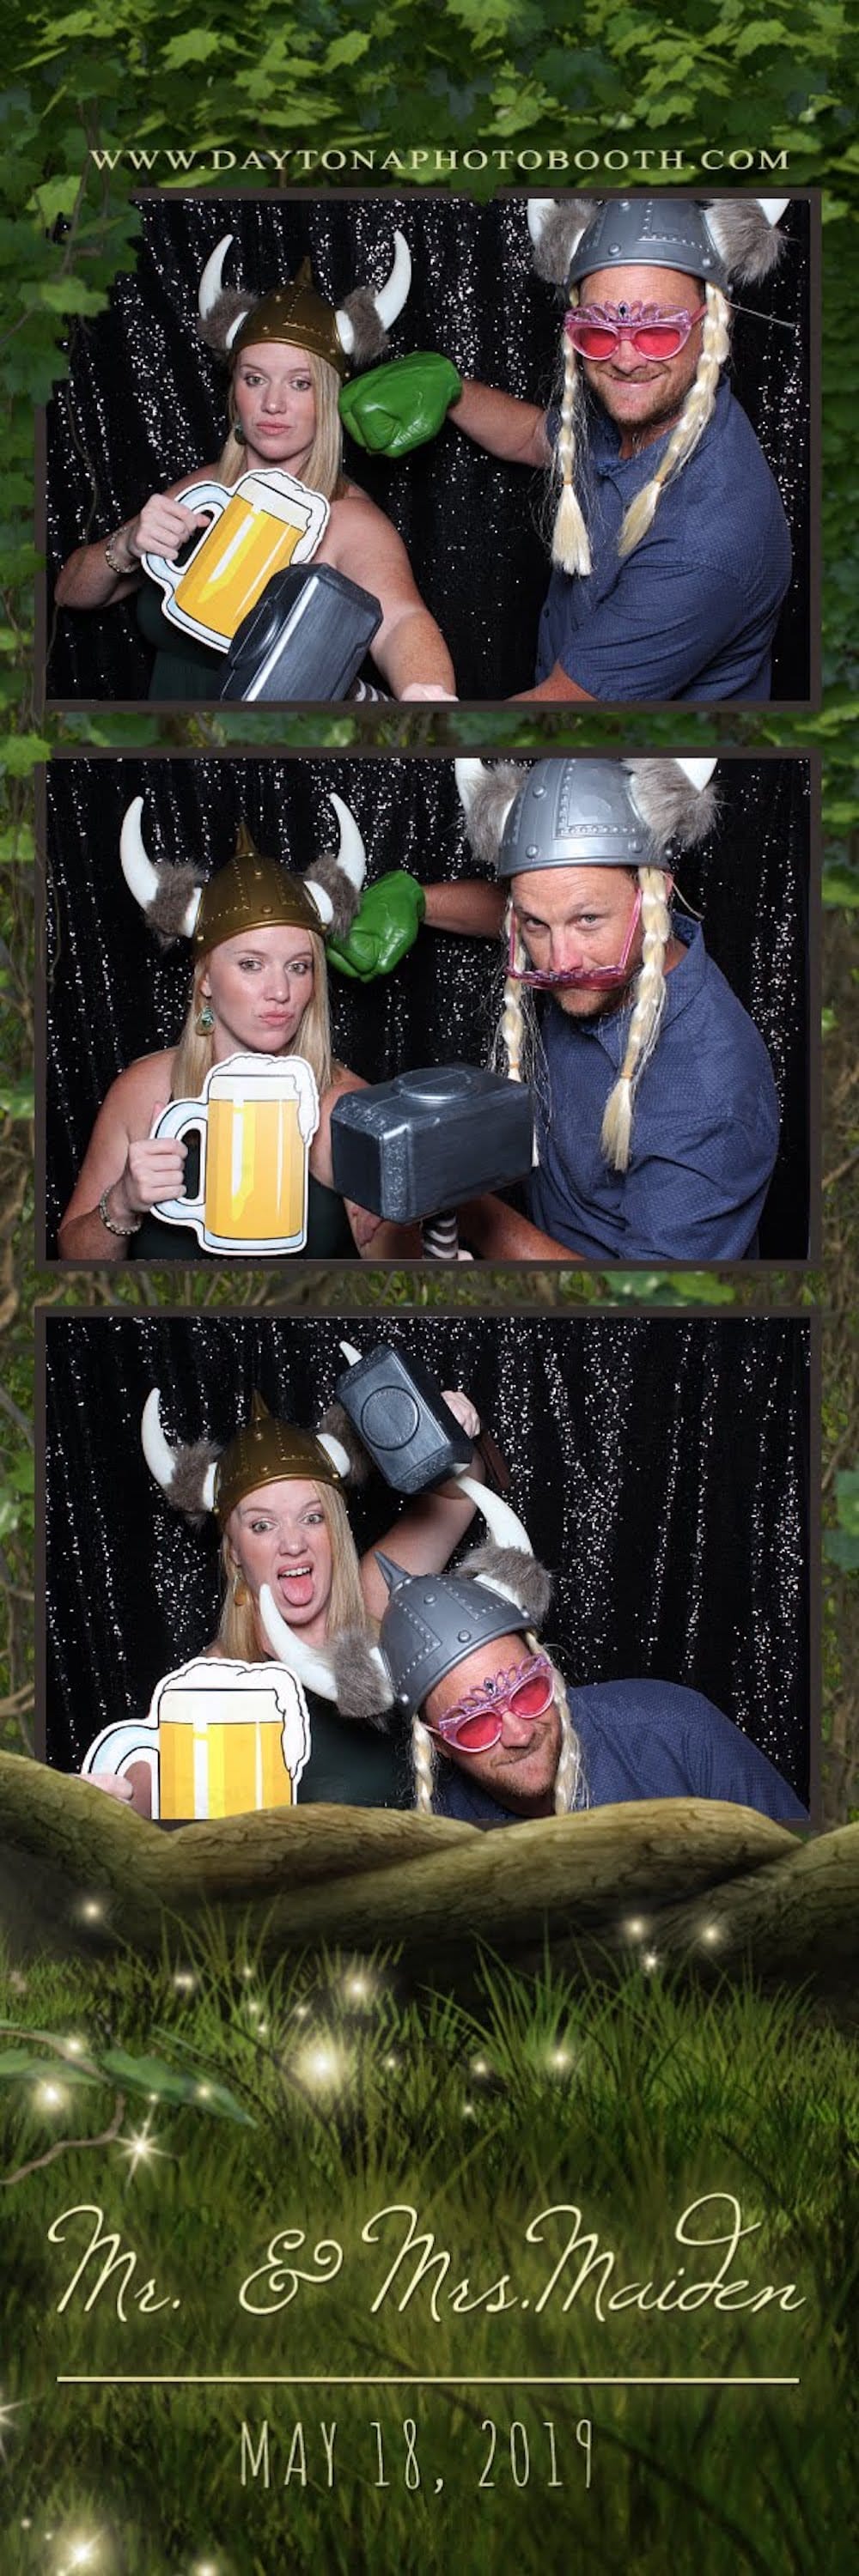 decorated photo booth